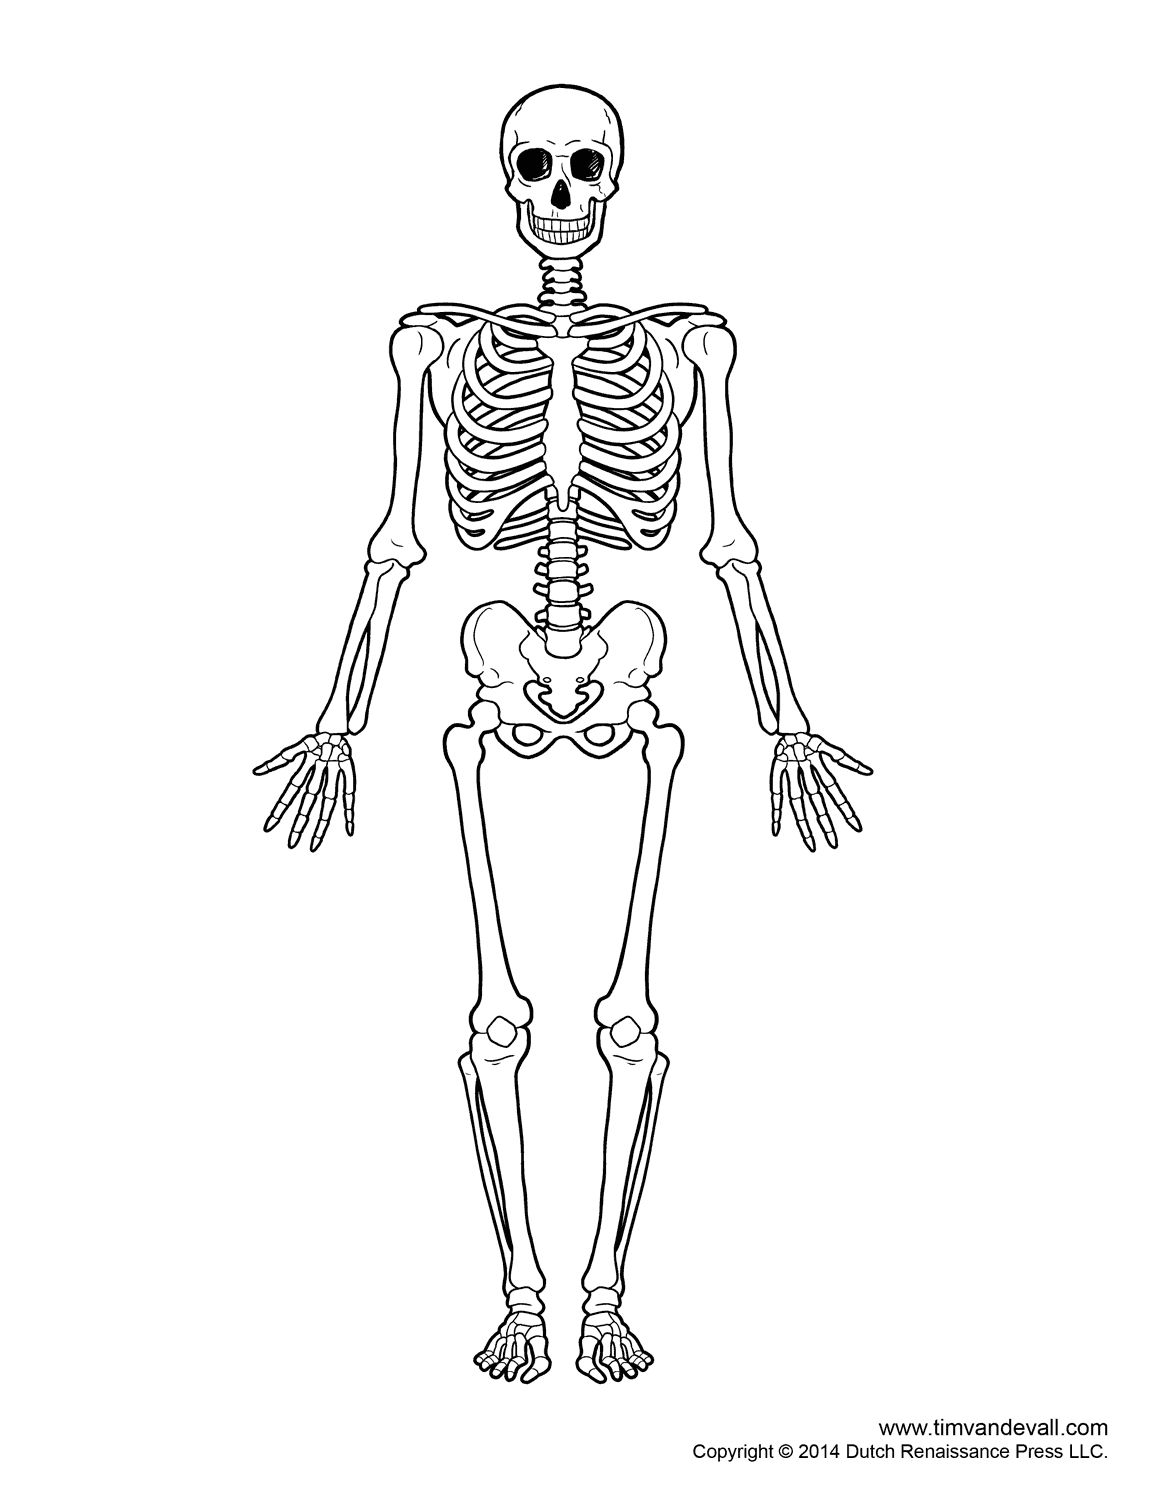 How To Draw A Skelton Diagram